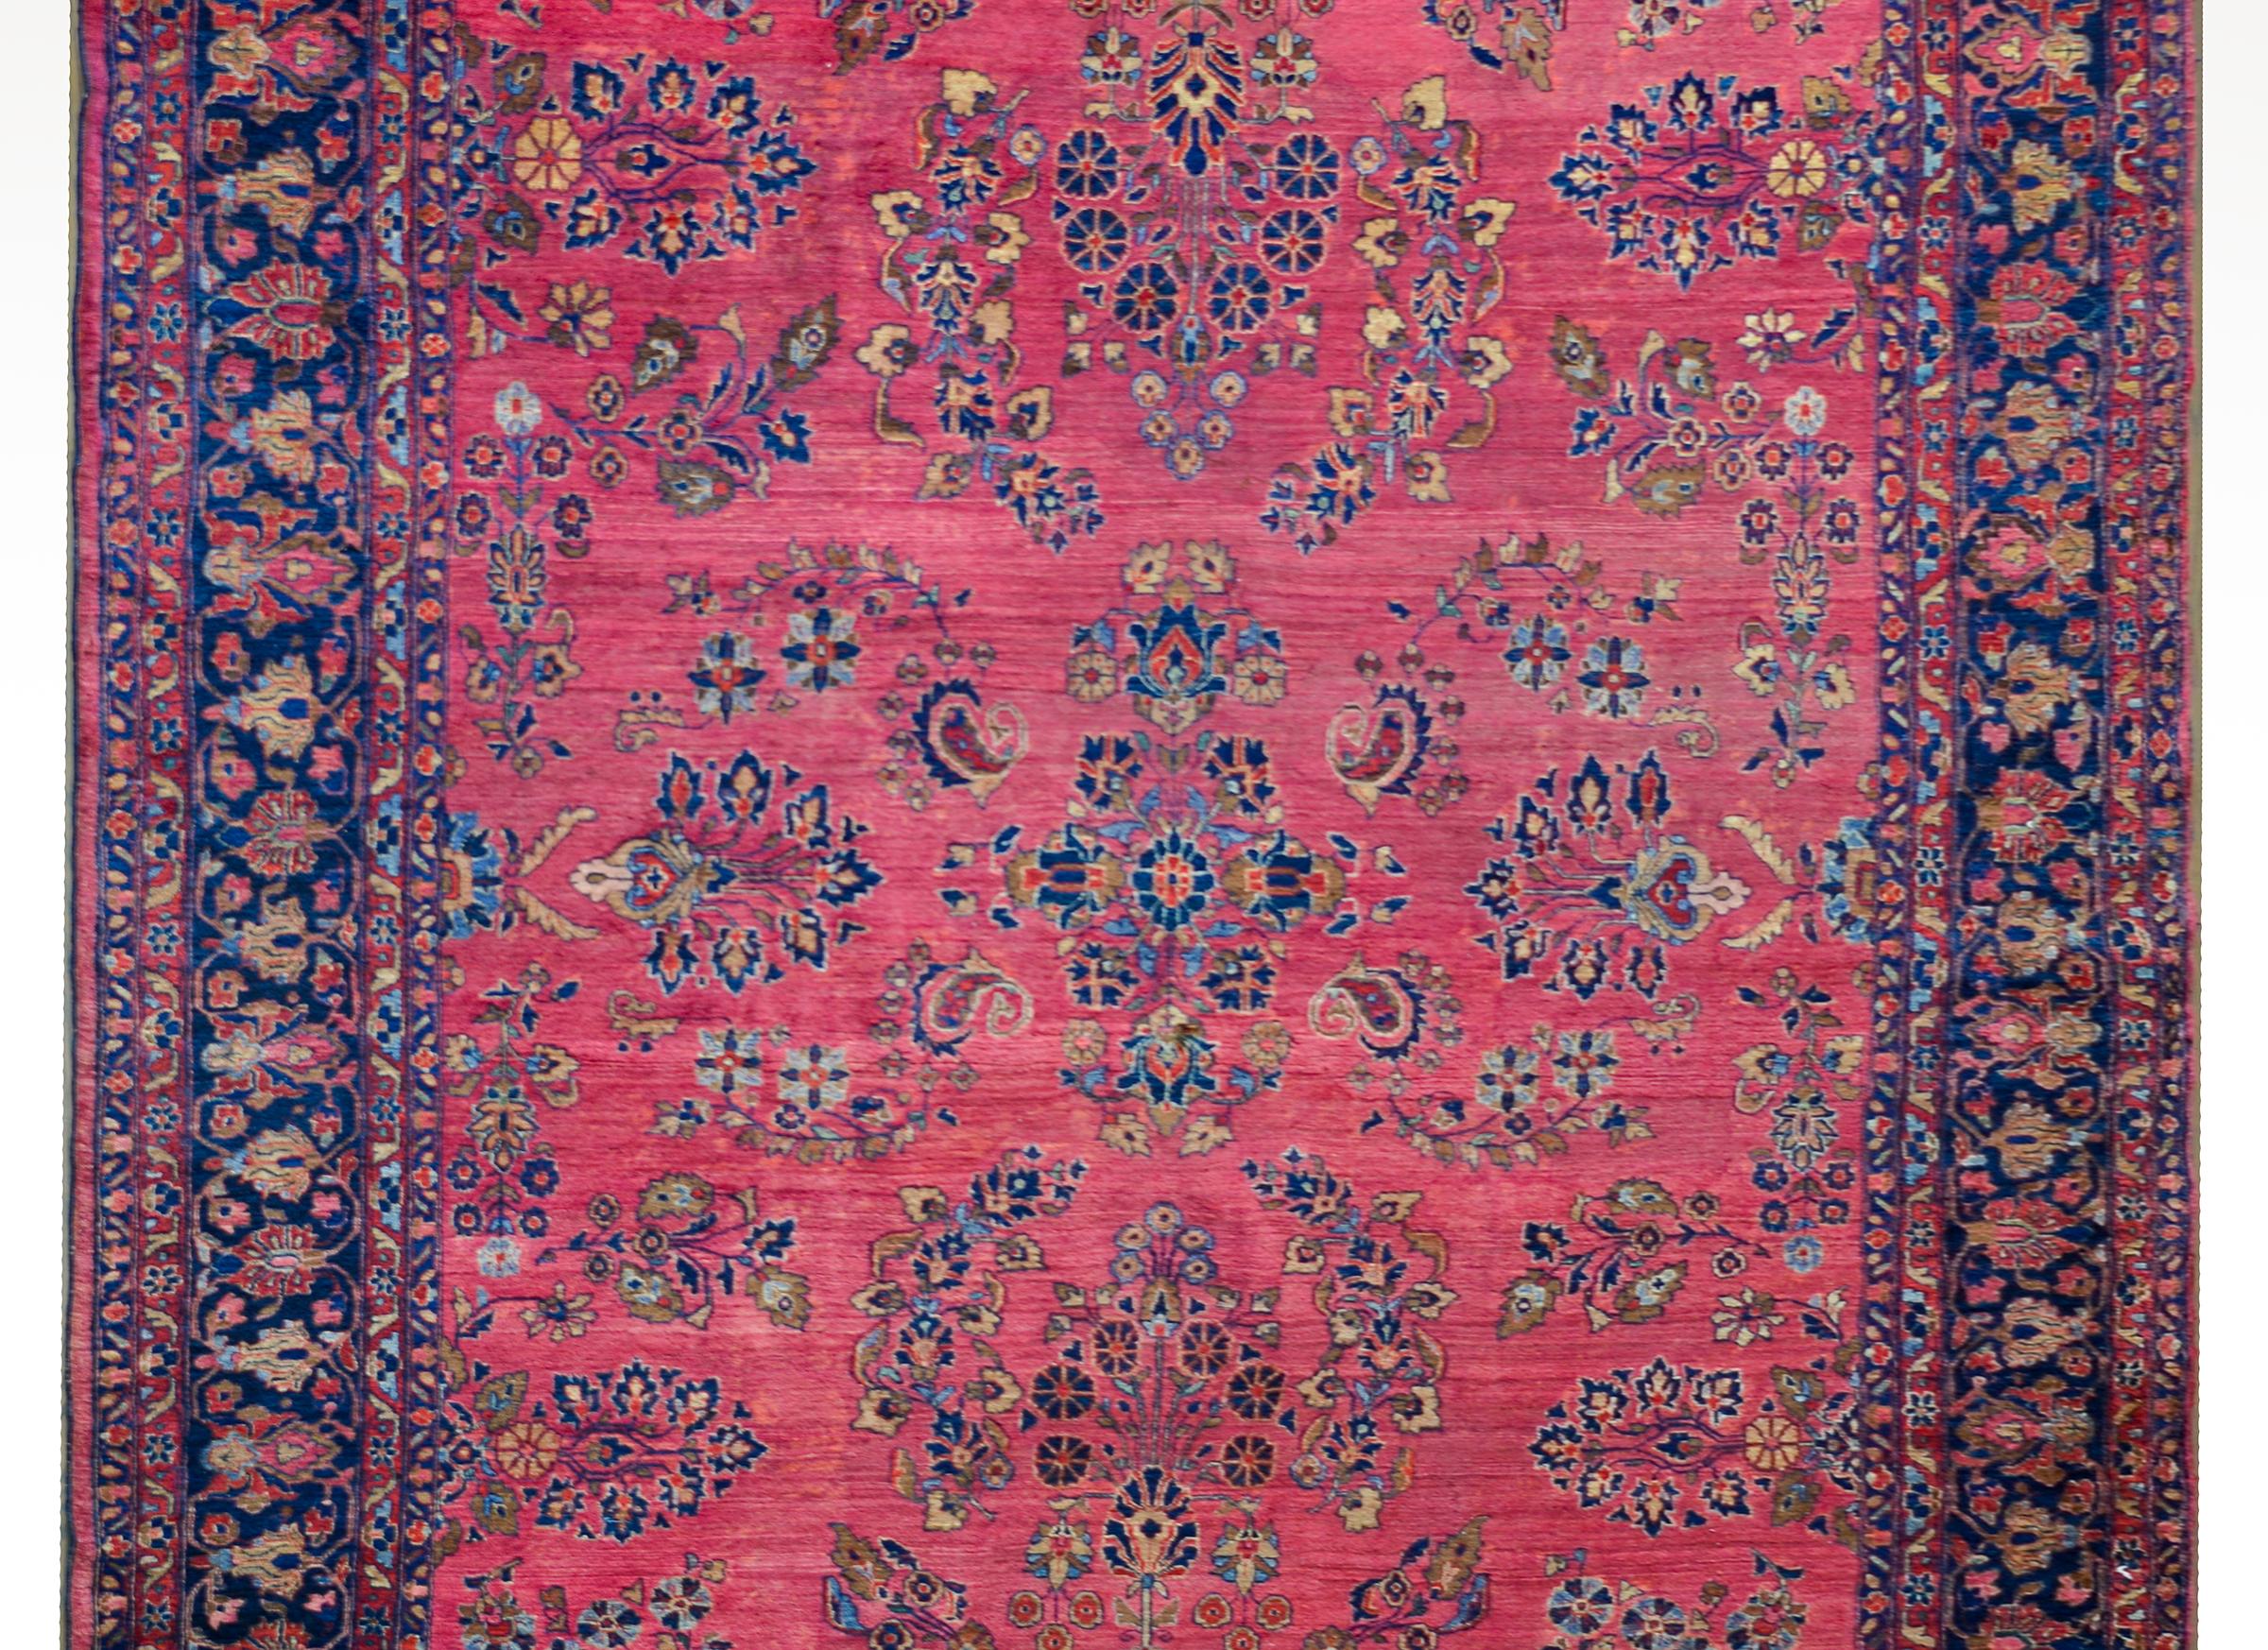 An incredible early 20th century Persian Sarouk Mohajeran rug with an all-over mirrored floral cluster pattern woven in traditional Sarouk colors of light and dark indigo, pink, cream, and red, against a cranberry colored background, and surrounded